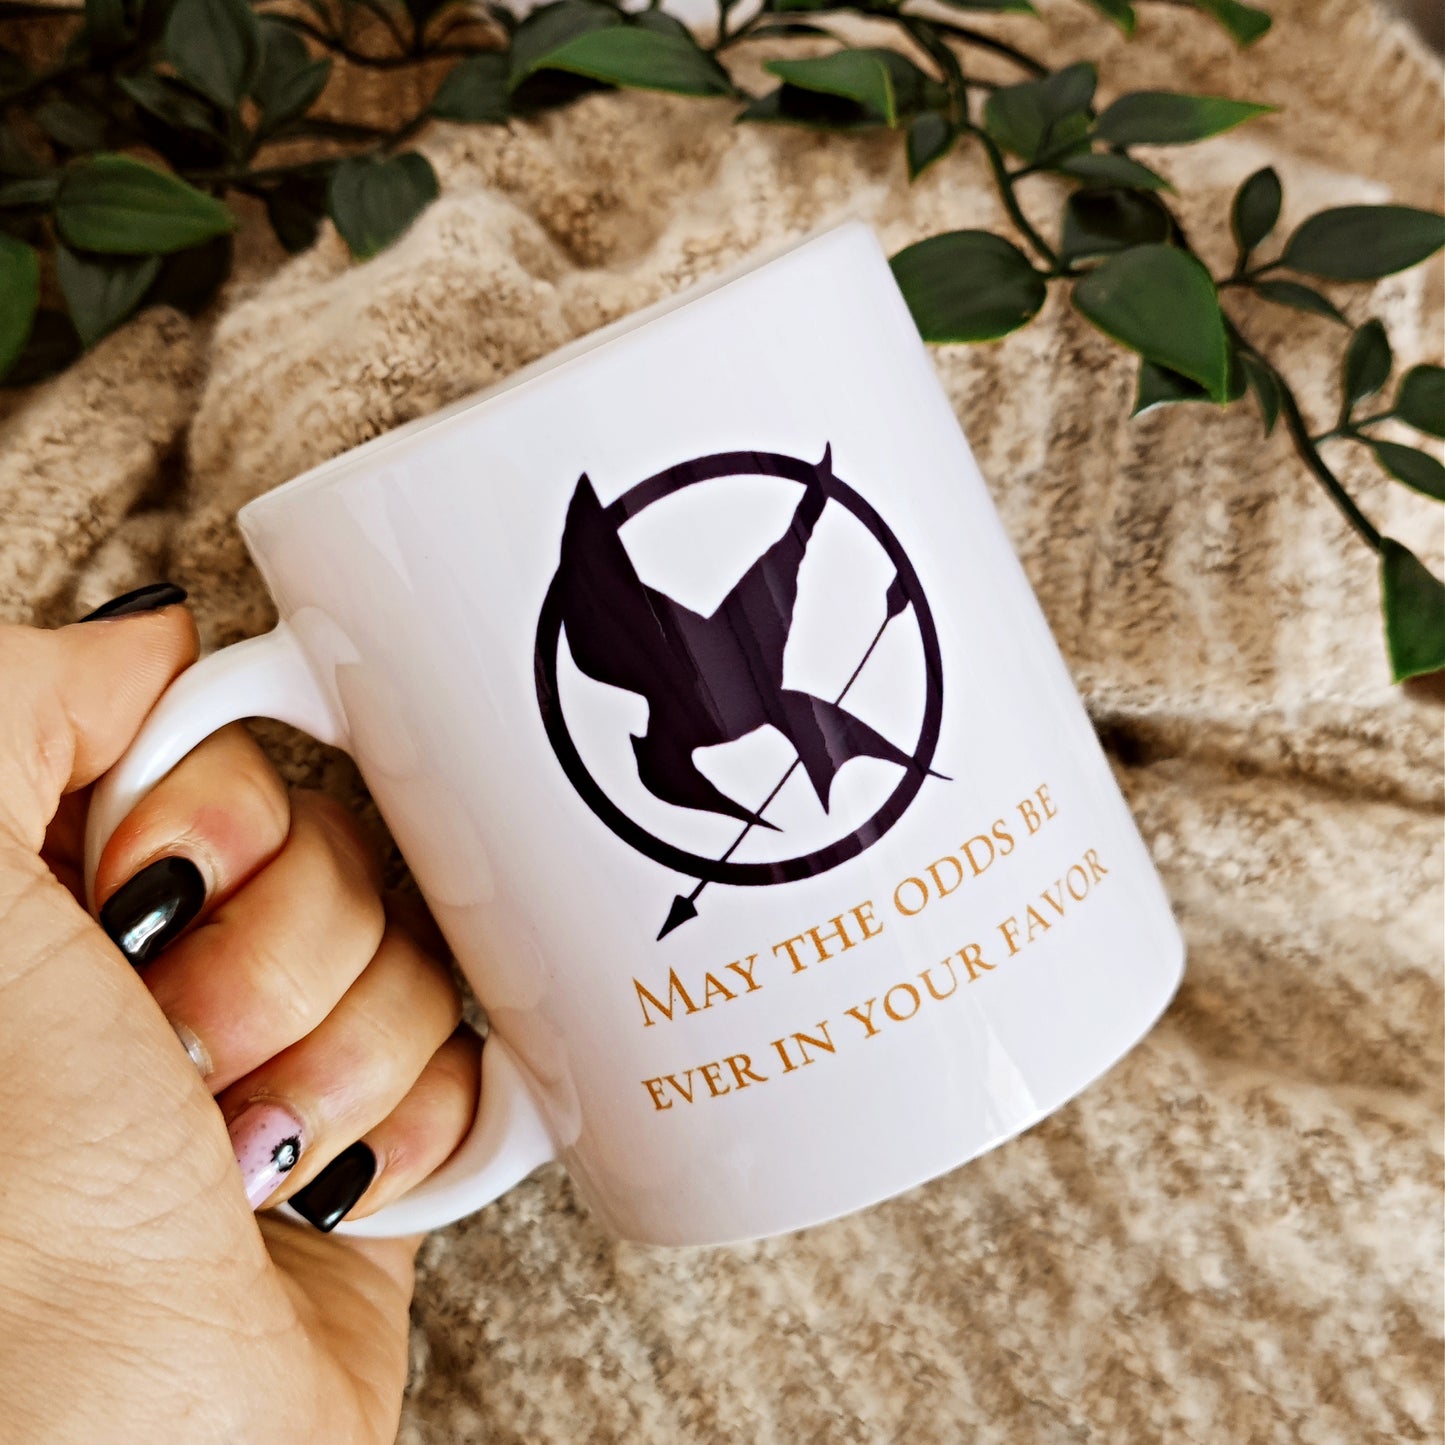 Tazza in ceramica "May the odds be ever in your favor" 325 ml